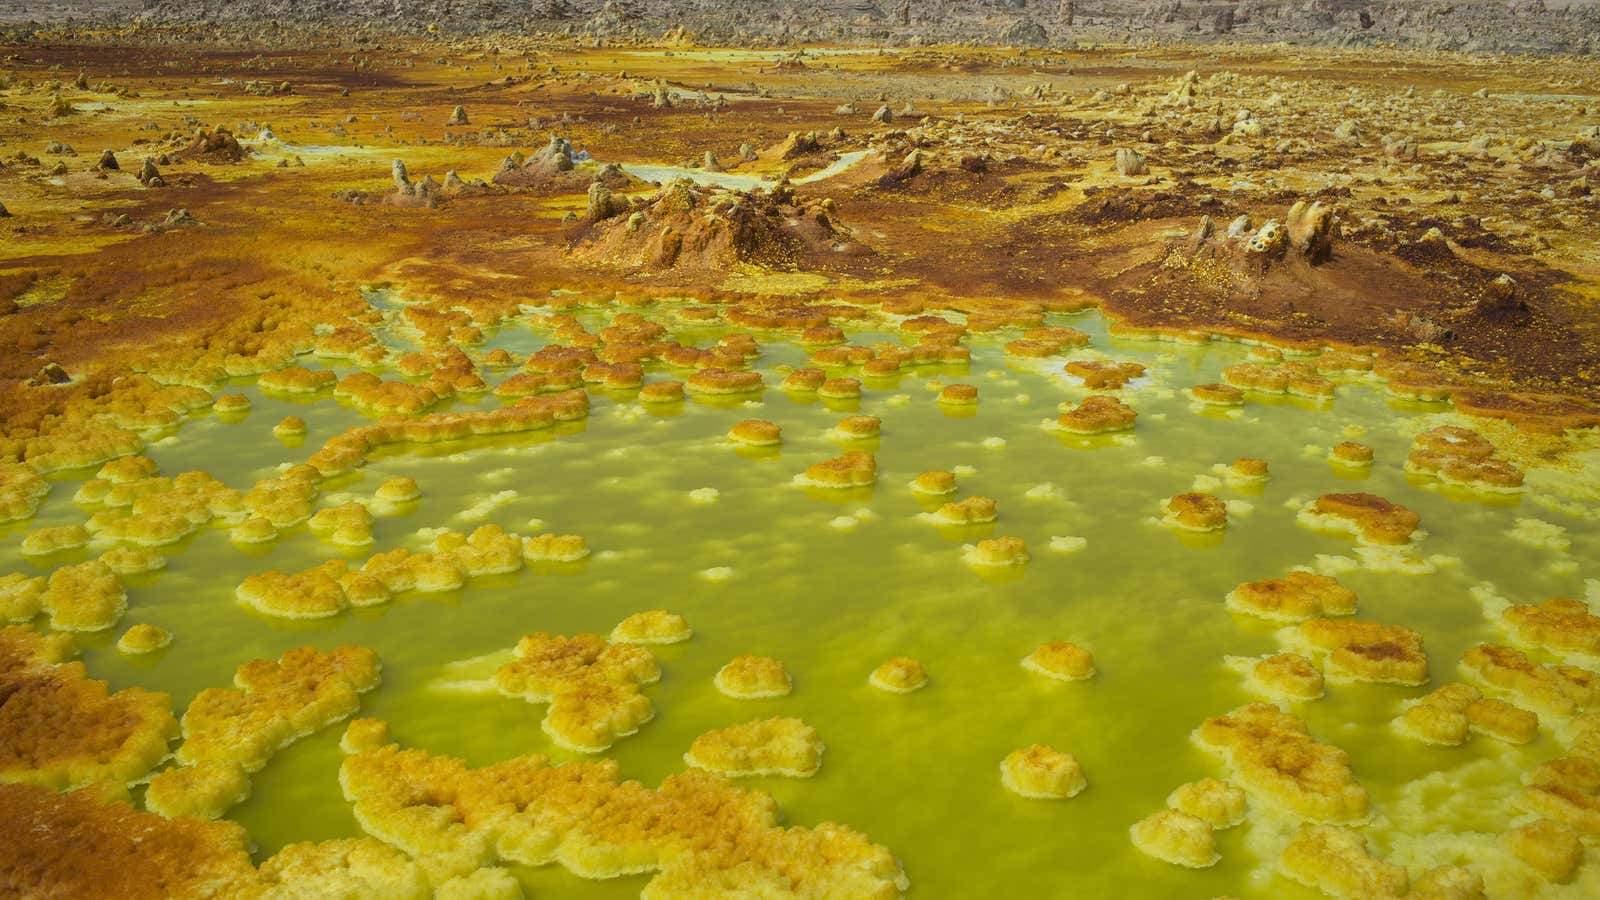 The Danakil Depression in Ethiopia is one of the hottest and harshest environments on earth.